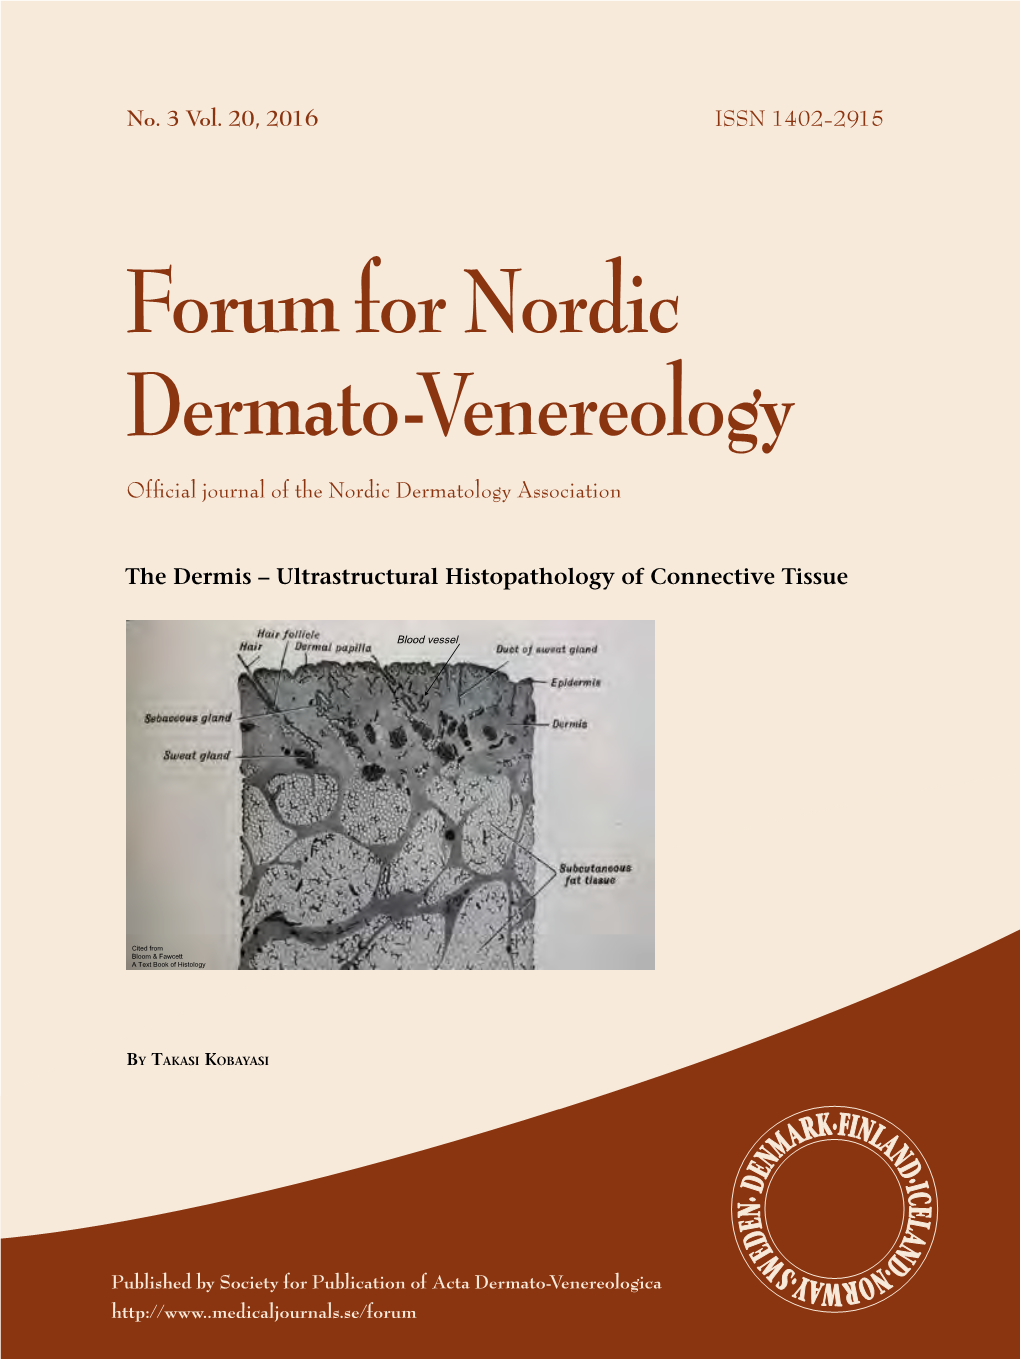 Forum for Nordic Dermato-Venereology Official Journal of the Nordic Dermatology Association